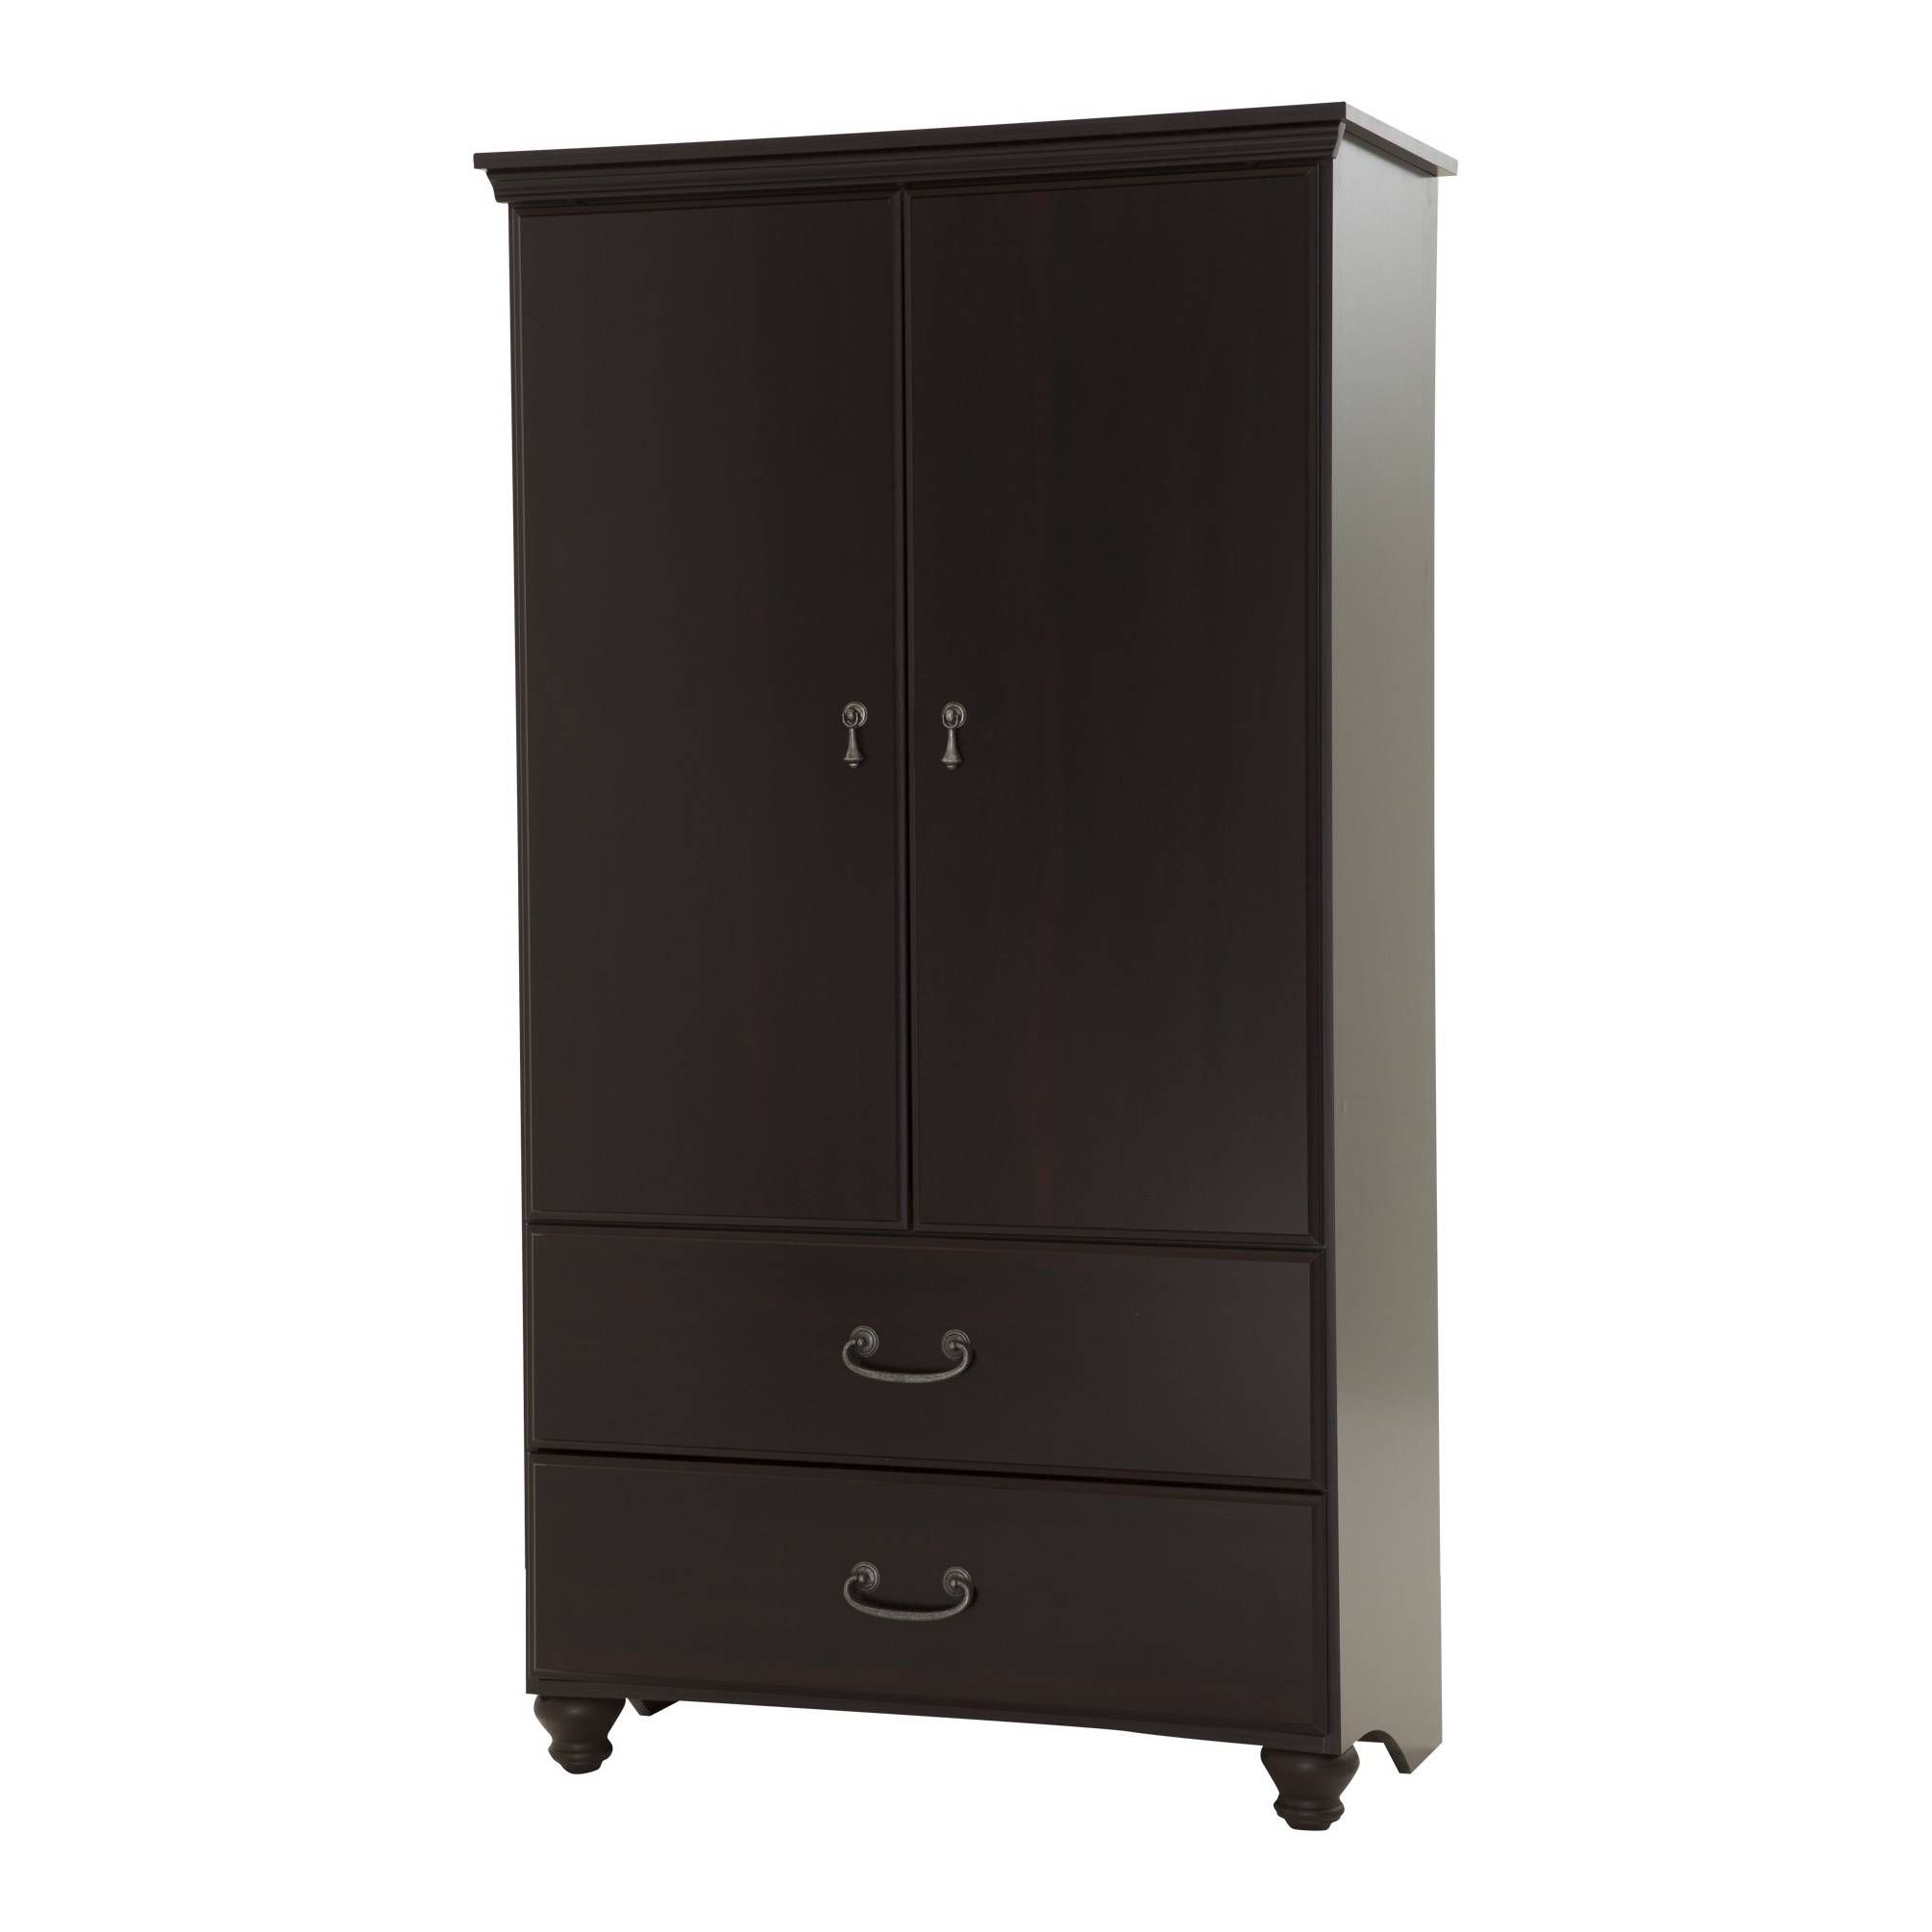 Armoire : Black Armoire Wardrobe Noble Armoire Black Wood Wardrobe Intended For Black French Wardrobes (View 9 of 15)